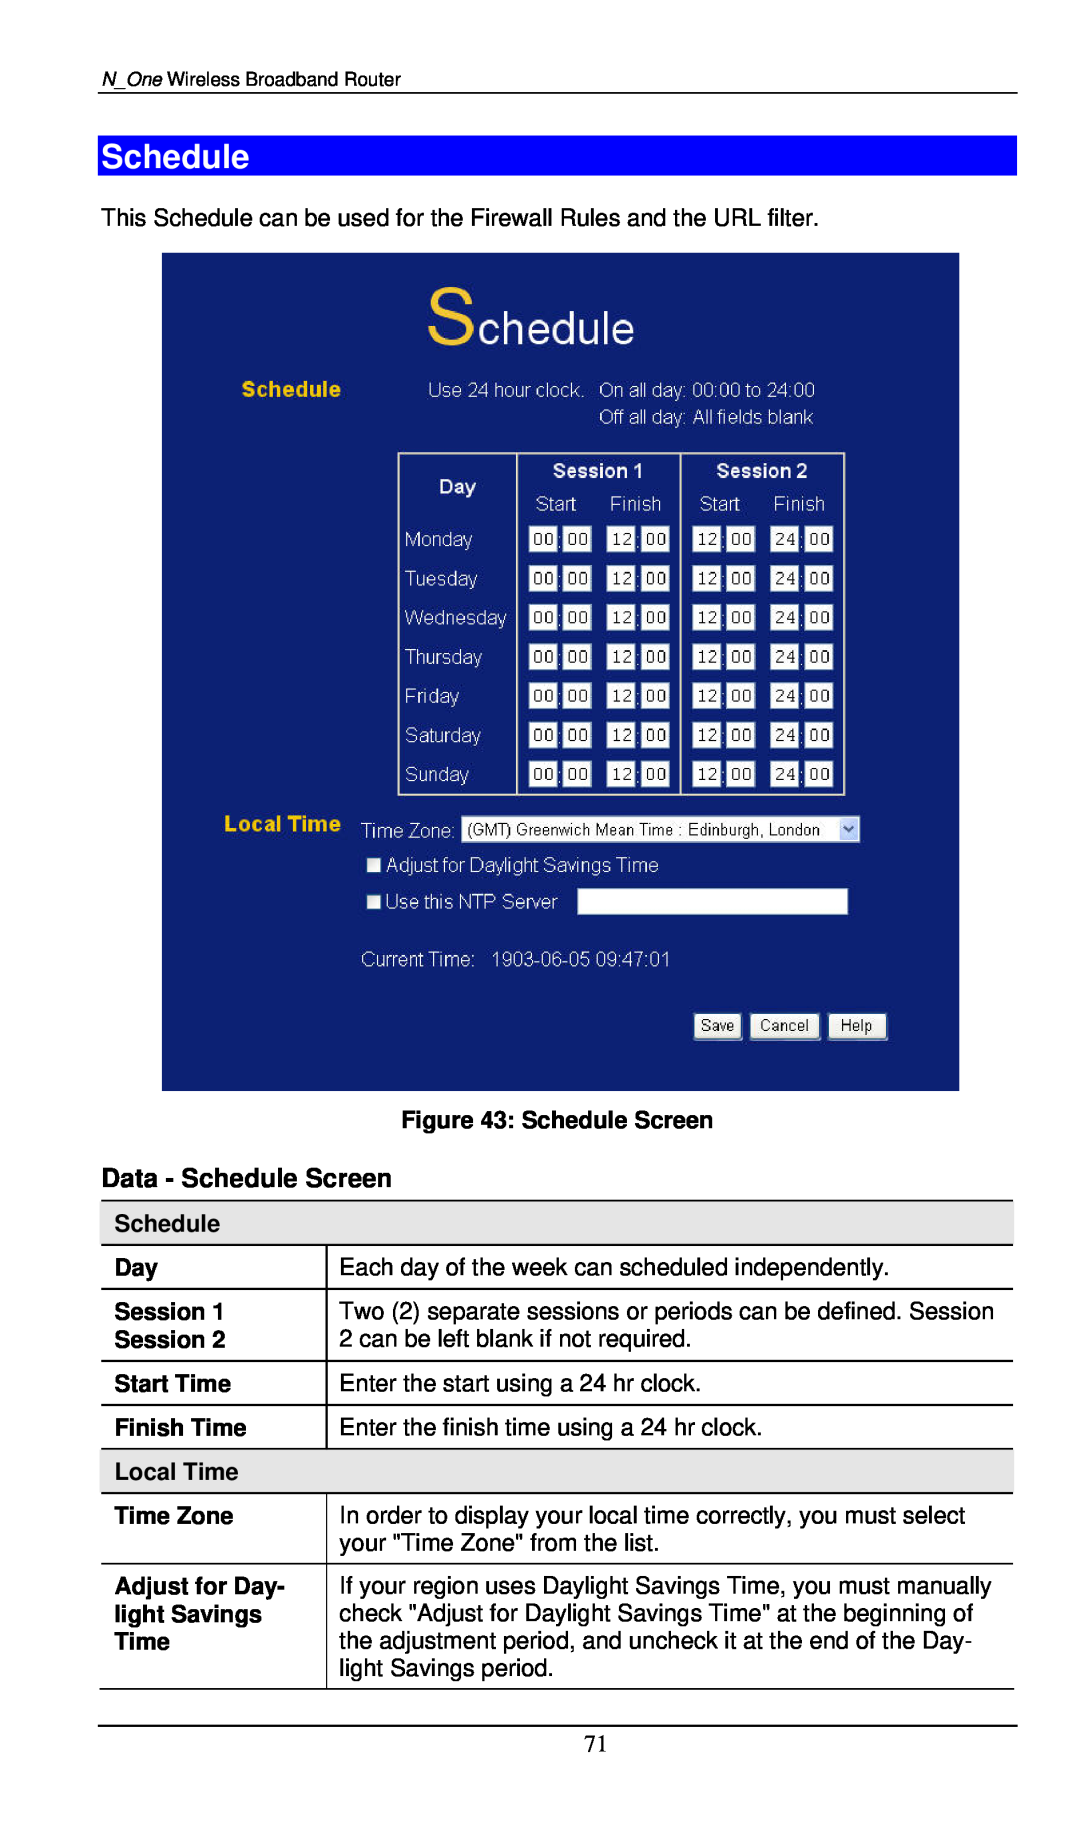 LevelOne WBR-6000 user manual Schedule Screen, Session, Start Time, Finish Time, Local Time, Time Zone, Adjust for Day 